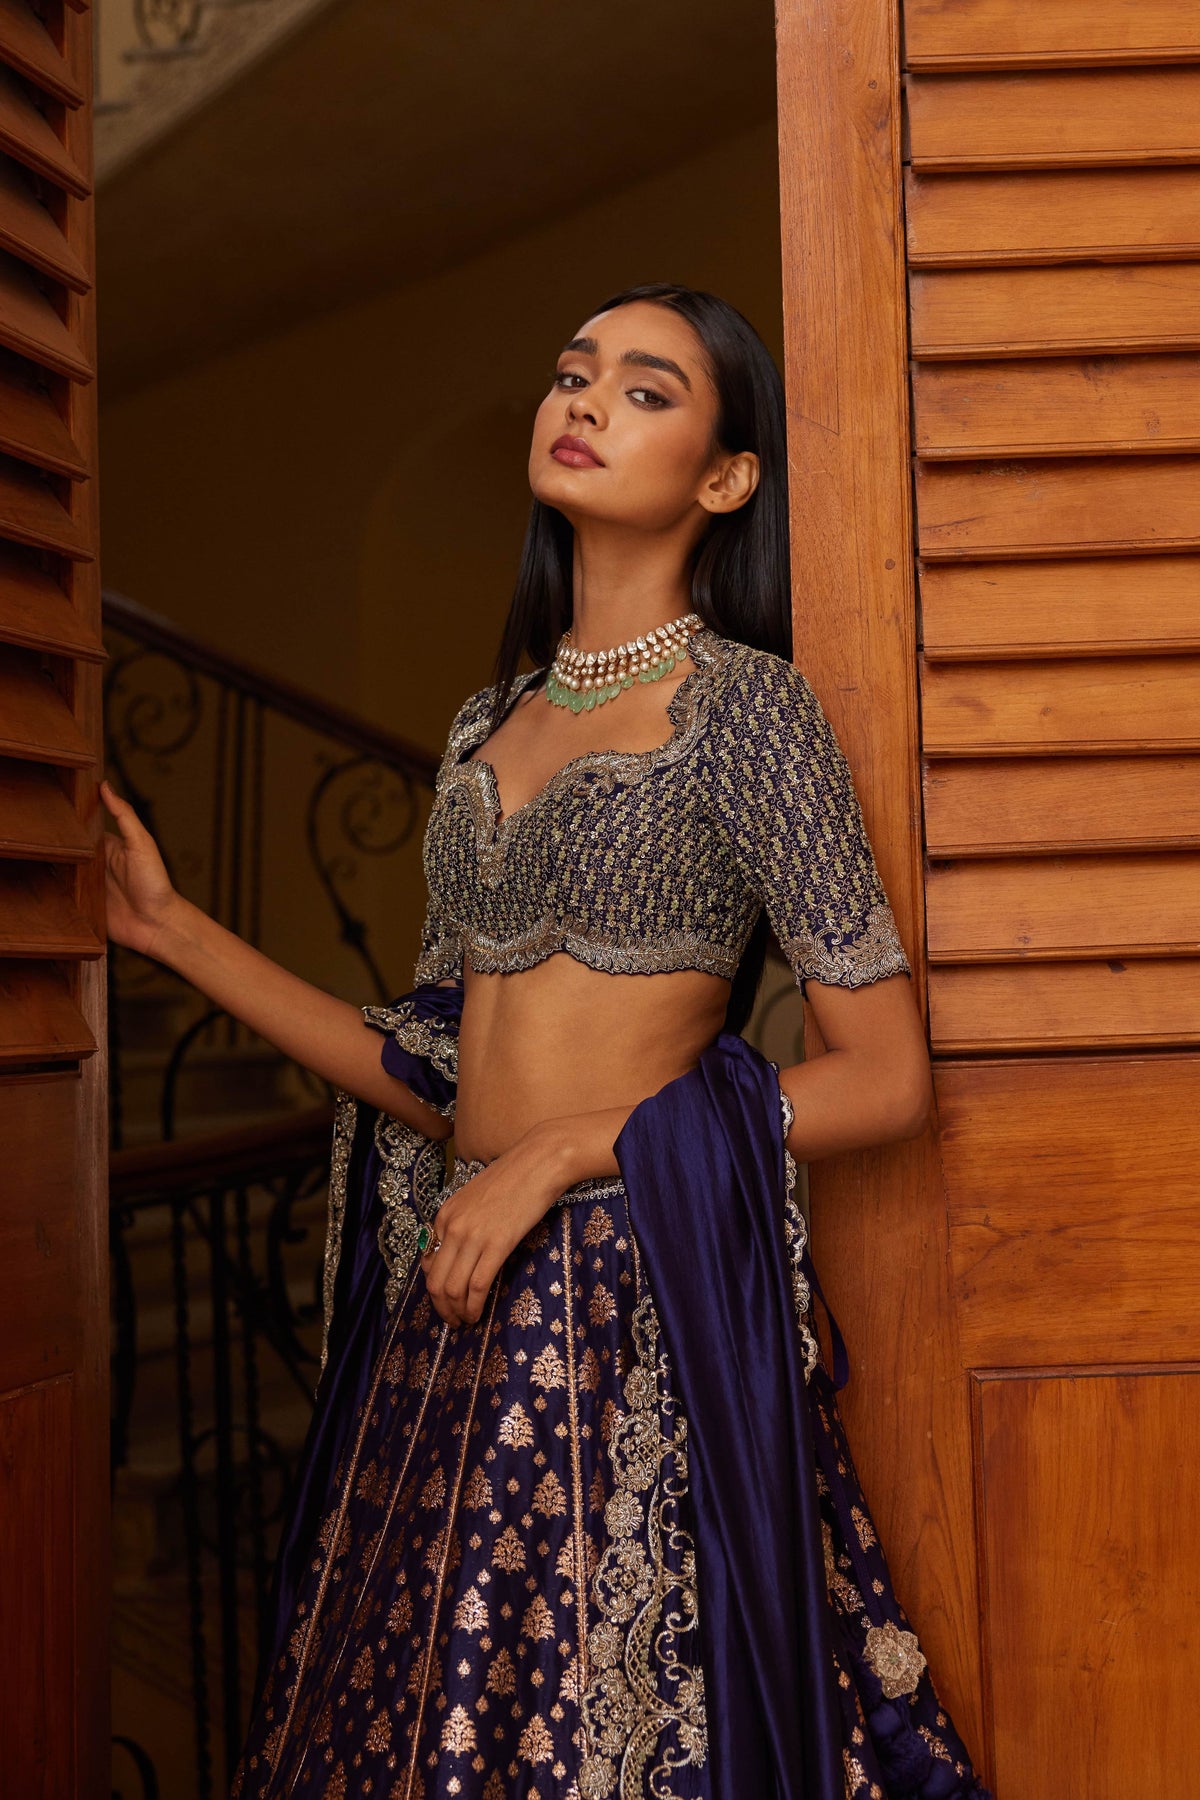 Embroidered Lehenga With Blouse and Dupatta